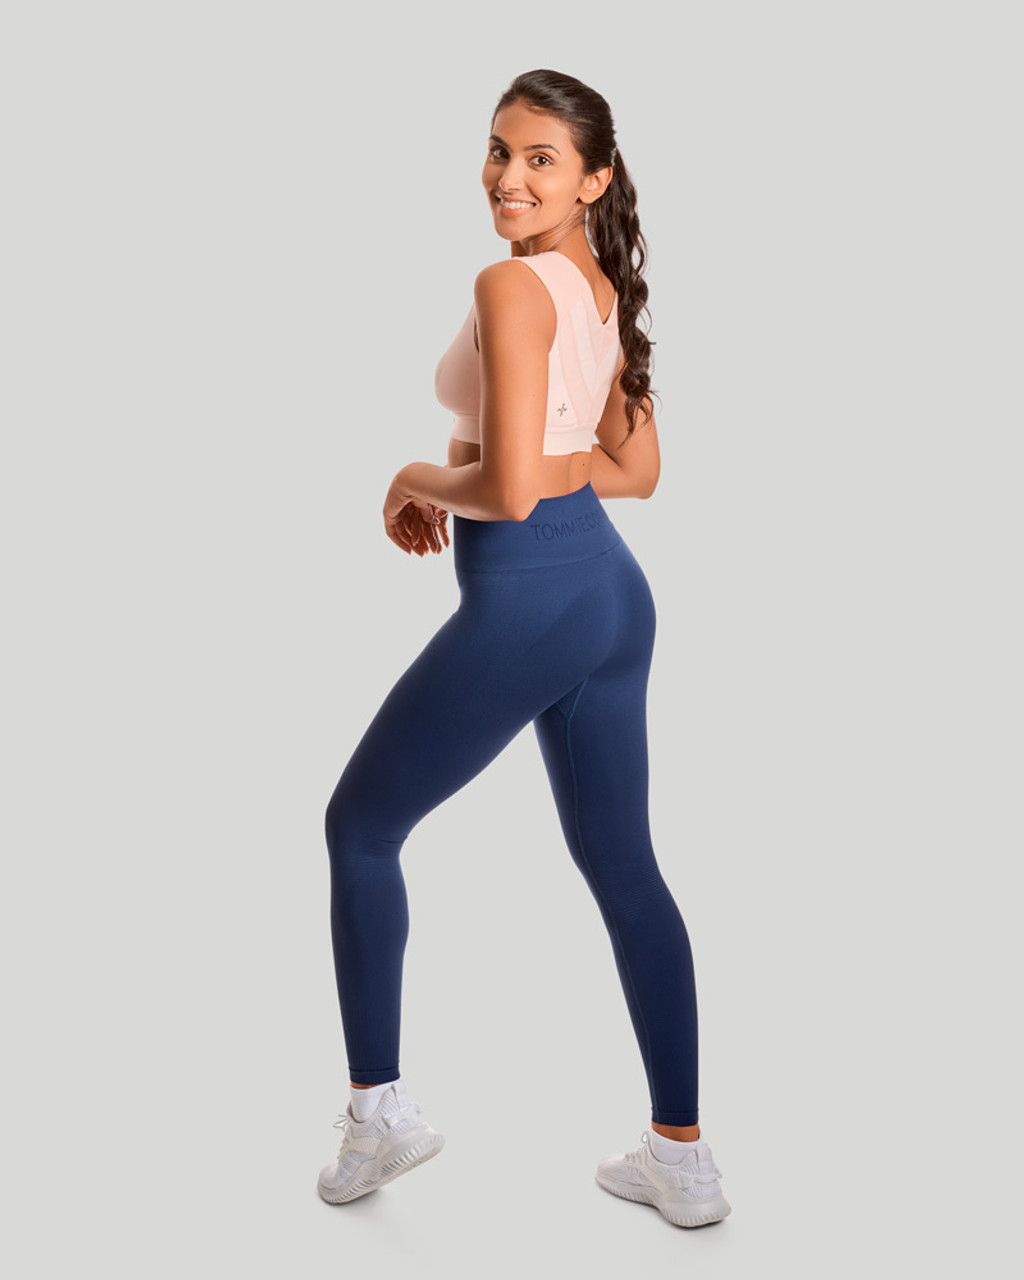 Tommie Copper Navy Blue 24 Lower Back Support Compression Leggings PICK  SIZE